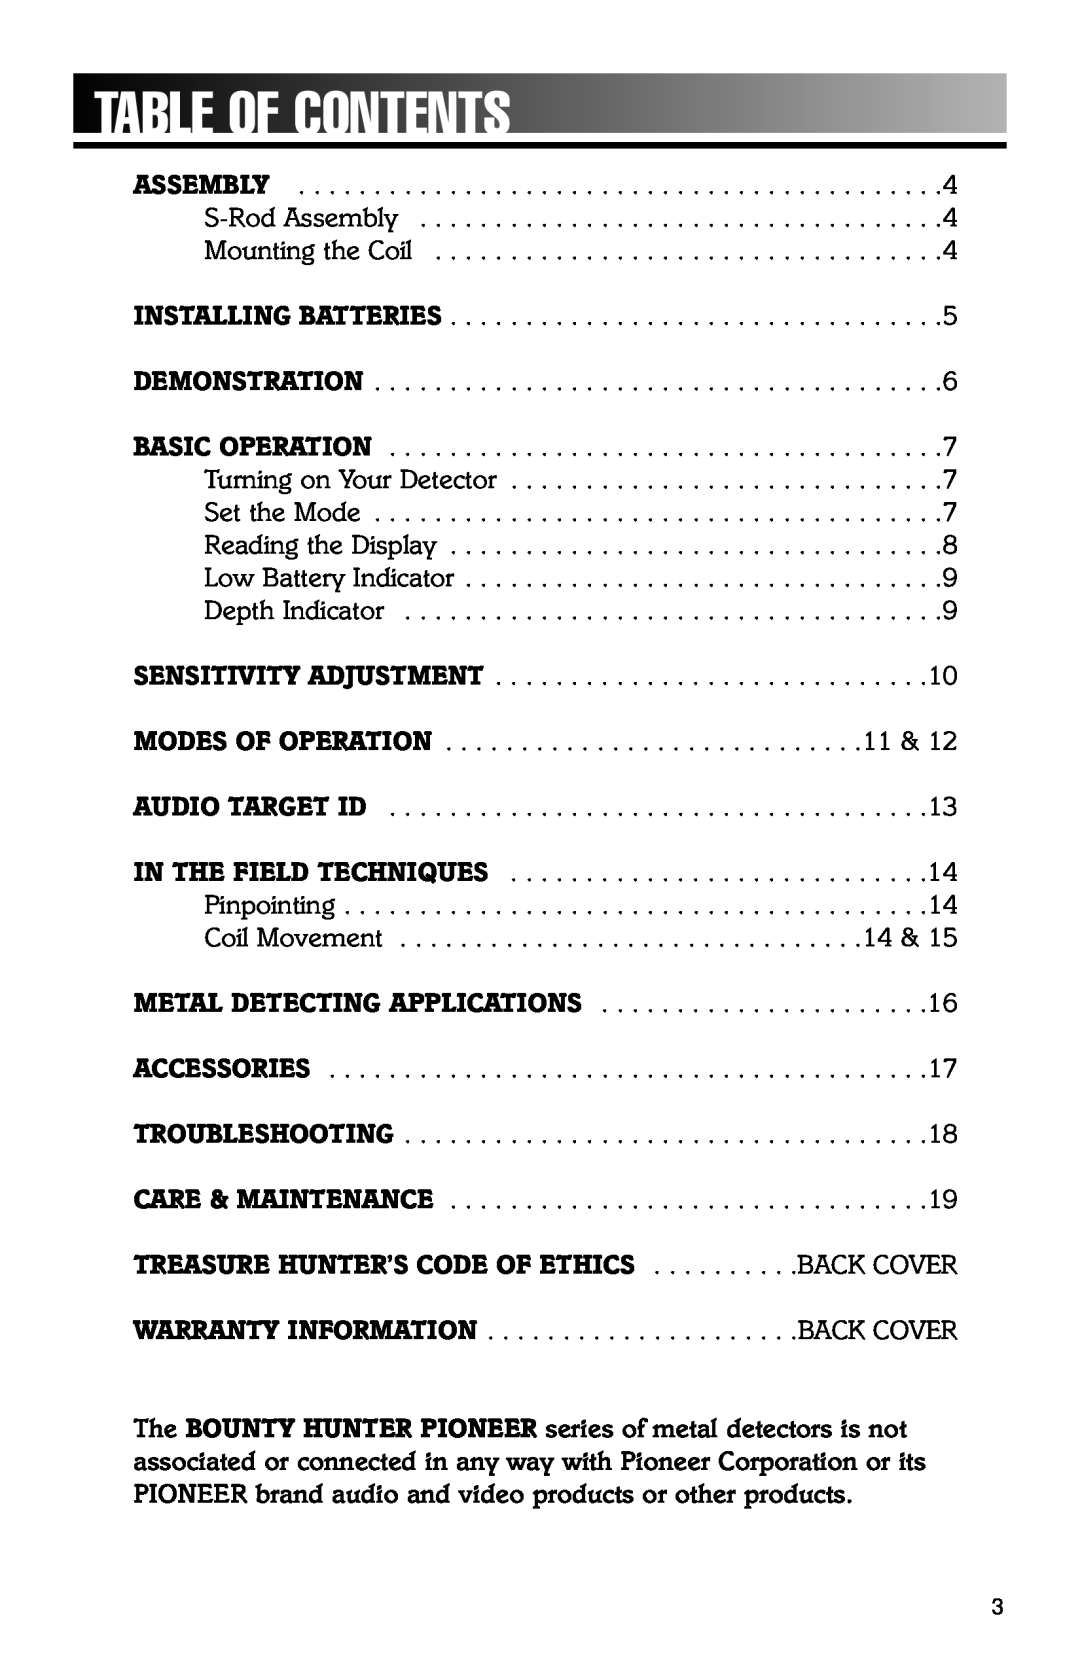 Bounty Hunter 202 owner manual Tableofcontents, Treasure Hunter’S Code Of Ethics . . . . . . . . . .Back Cover 